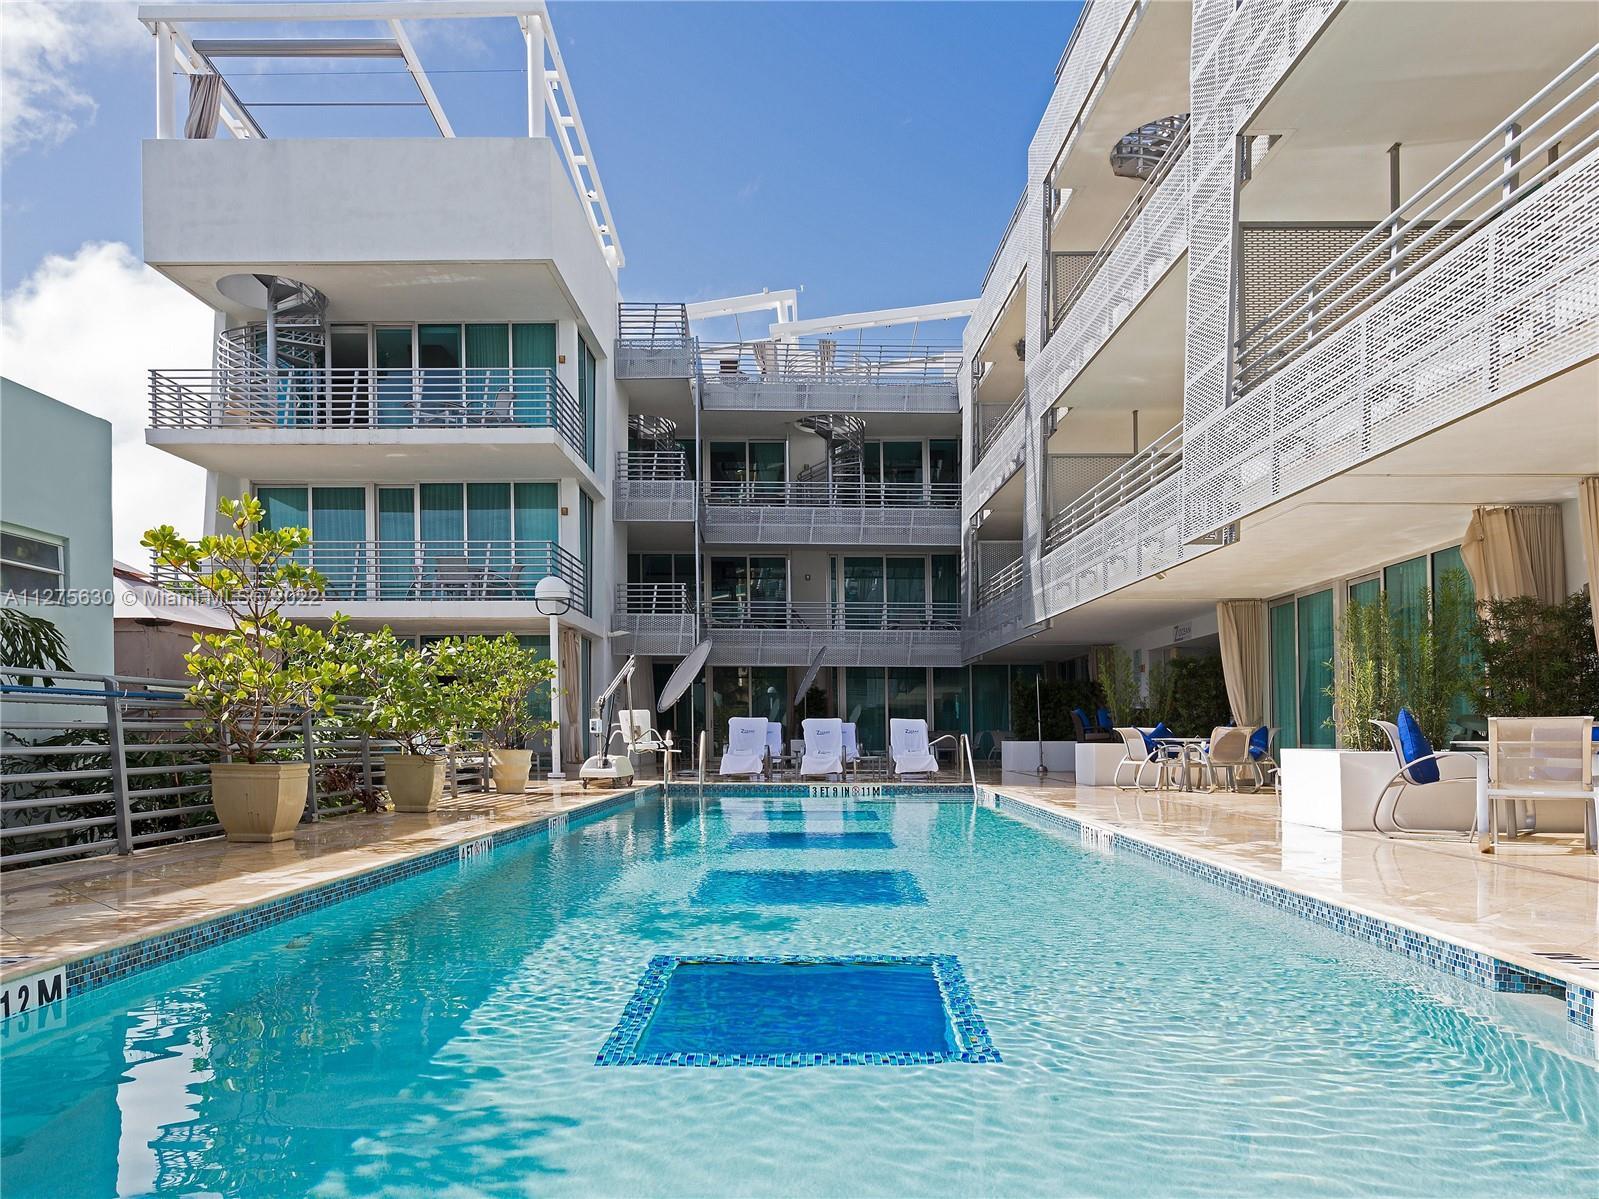 SOUTH BEACH – 15 fully furnished suites in the Z Ocean Hotel across from miles of white-sand beach o